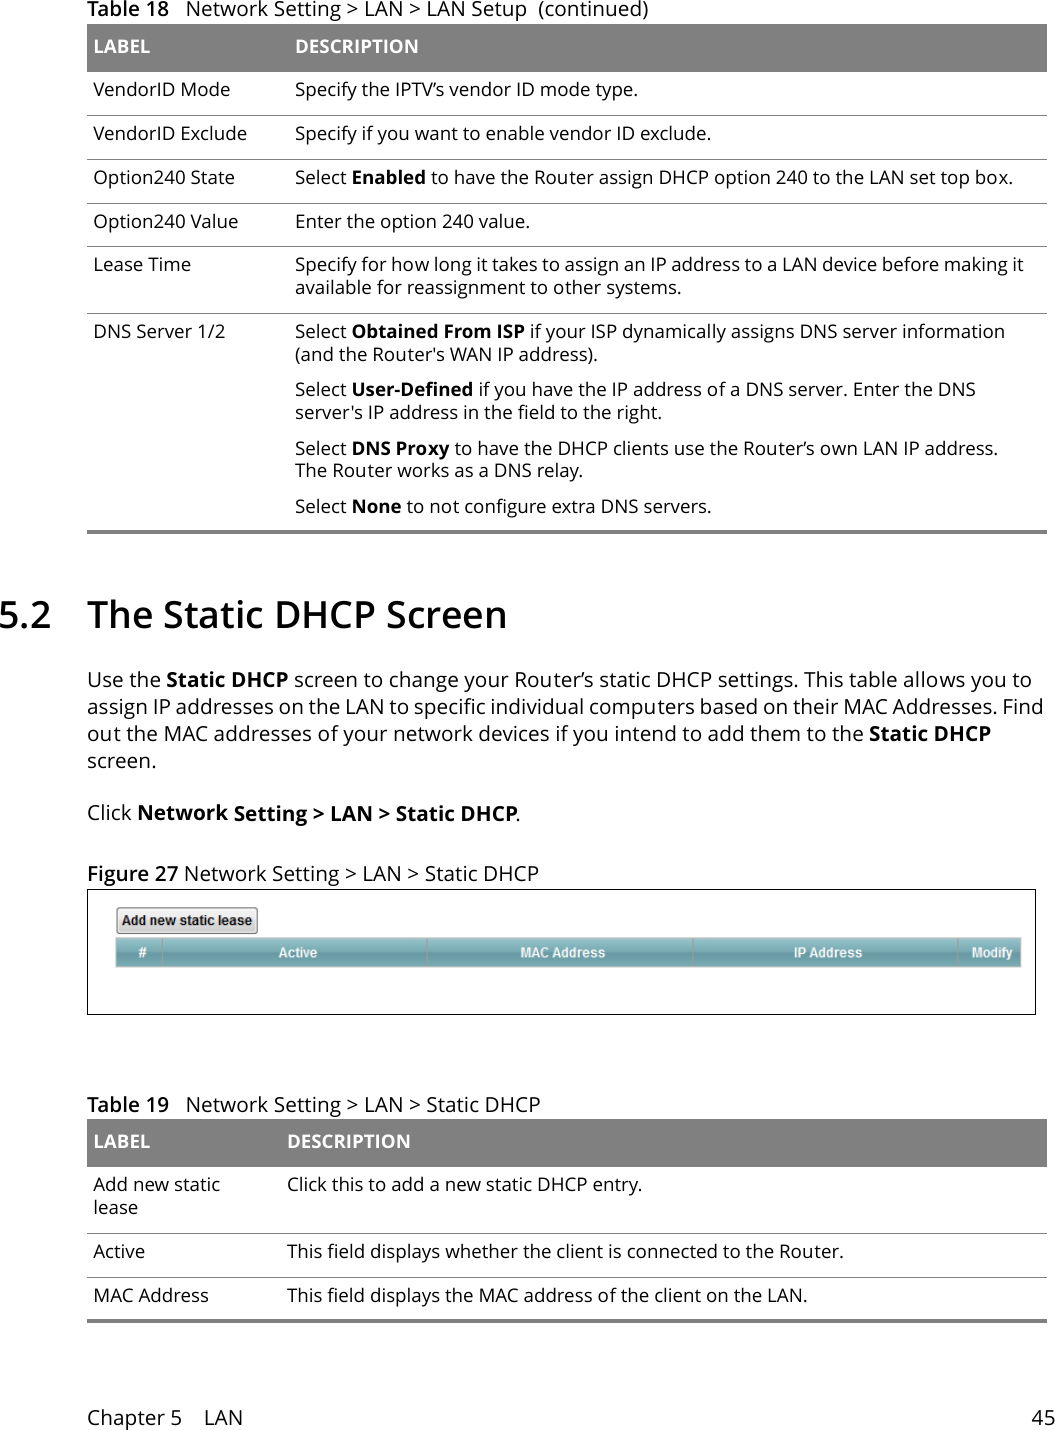 Chapter 5    LAN 455.2   The Static DHCP ScreenUse the Static DHCP screen to change your Router’s static DHCP settings. This table allows you to assign IP addresses on the LAN to specific individual computers based on their MAC Addresses. Find out the MAC addresses of your network devices if you intend to add them to the Static DHCP screen.Click Network Setting &gt; LAN &gt; Static DHCP.Figure 27 Network Setting &gt; LAN &gt; Static DHCP VendorID Mode Specify the IPTV’s vendor ID mode type.VendorID Exclude Specify if you want to enable vendor ID exclude.Option240 State Select Enabled to have the Router assign DHCP option 240 to the LAN set top box.Option240 Value Enter the option 240 value.Lease Time Specify for how long it takes to assign an IP address to a LAN device before making it available for reassignment to other systems.DNS Server 1/2 Select Obtained From ISP if your ISP dynamically assigns DNS server information (and the Router&apos;s WAN IP address).Select User-Defined if you have the IP address of a DNS server. Enter the DNS server&apos;s IP address in the field to the right. Select DNS Proxy to have the DHCP clients use the Router’s own LAN IP address. The Router works as a DNS relay. Select None to not configure extra DNS servers. Table 18   Network Setting &gt; LAN &gt; LAN Setup  (continued)LABEL DESCRIPTIONTable 19   Network Setting &gt; LAN &gt; Static DHCP LABEL DESCRIPTIONAdd new static leaseClick this to add a new static DHCP entry. Active This field displays whether the client is connected to the Router.MAC Address This field displays the MAC address of the client on the LAN.